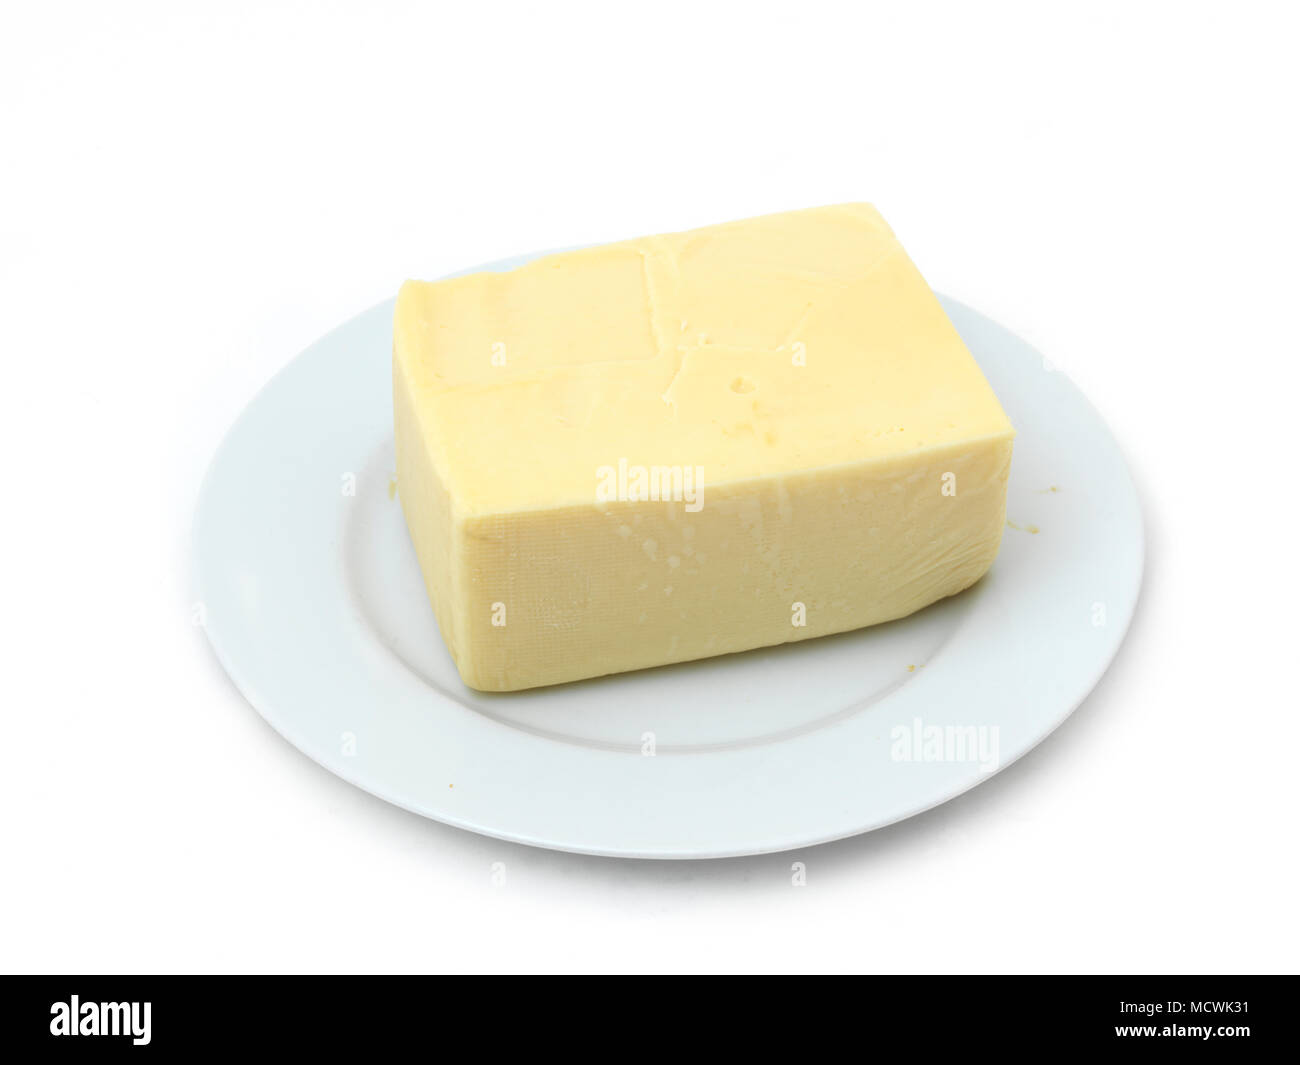 Norvegia Cheese From Norway On Plate Stock Photo